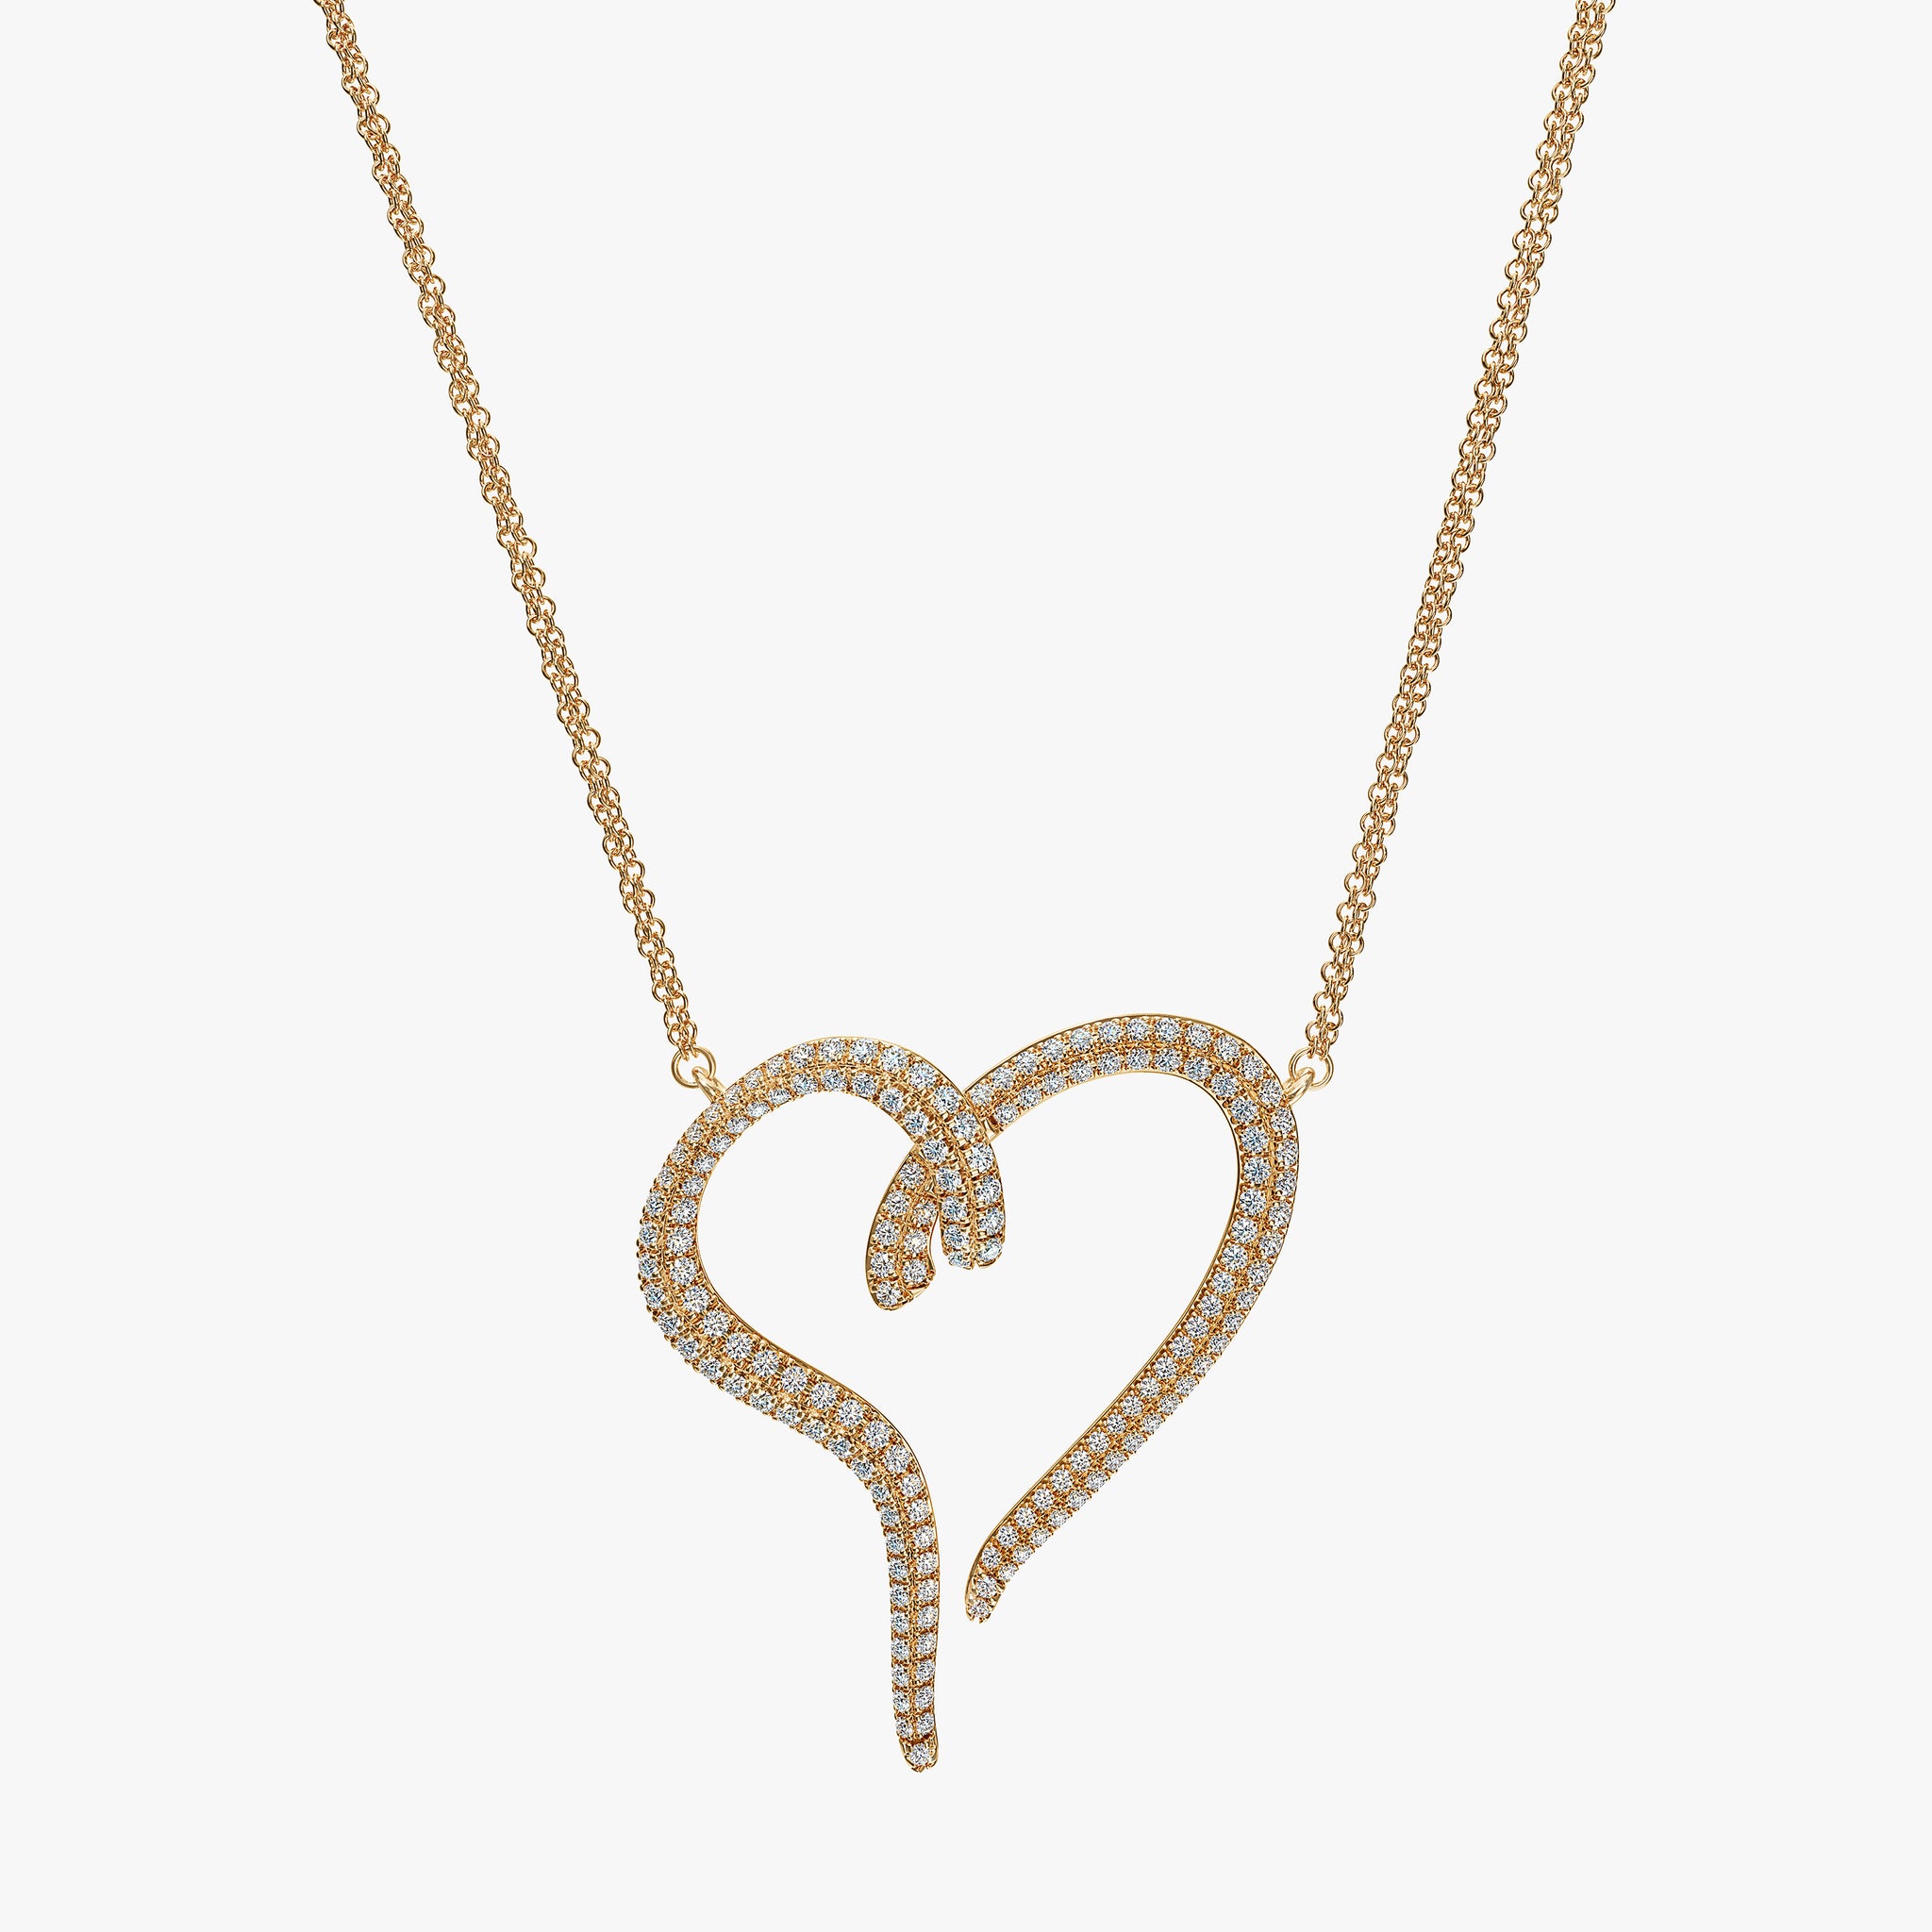 J'EVAR 14KT Yellow Gold Pave Heart ALTR Lab Grown Diamond Necklace Lock View